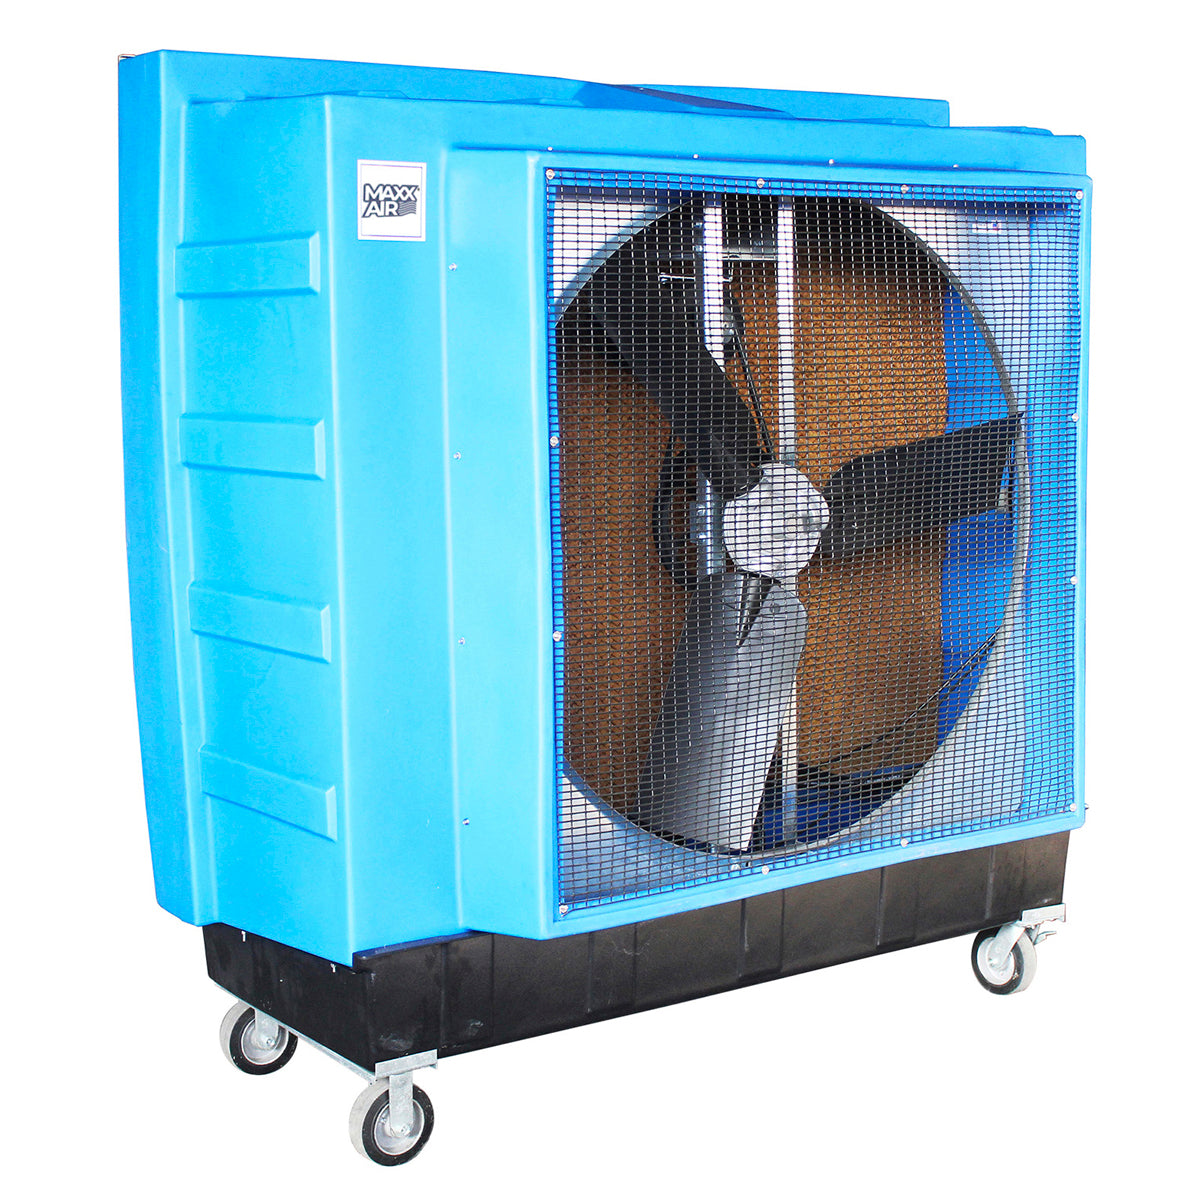 Maxx Air 48 In. 2-Speed Evaporative Cooler for 3,600 sq. ft.